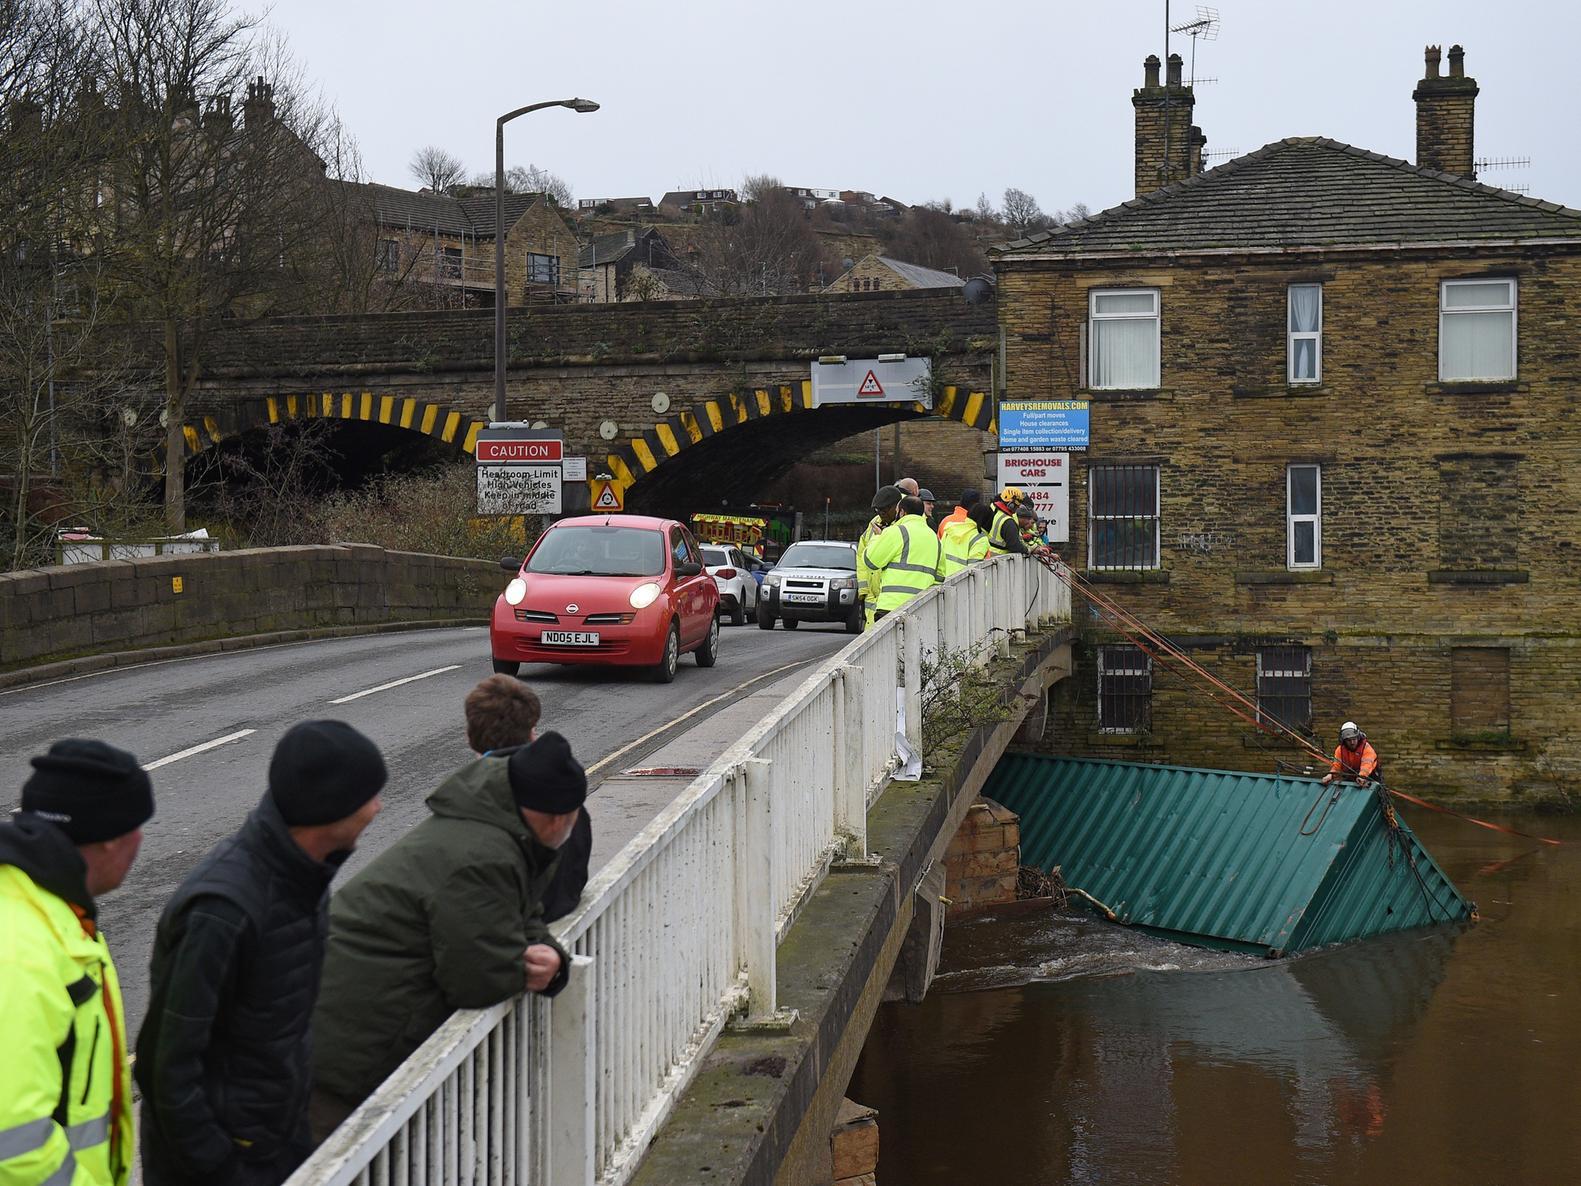 Further upstream, a shipping container became lodged under Rastrick Bridge, Brighouse, after a weekend of strong winds.